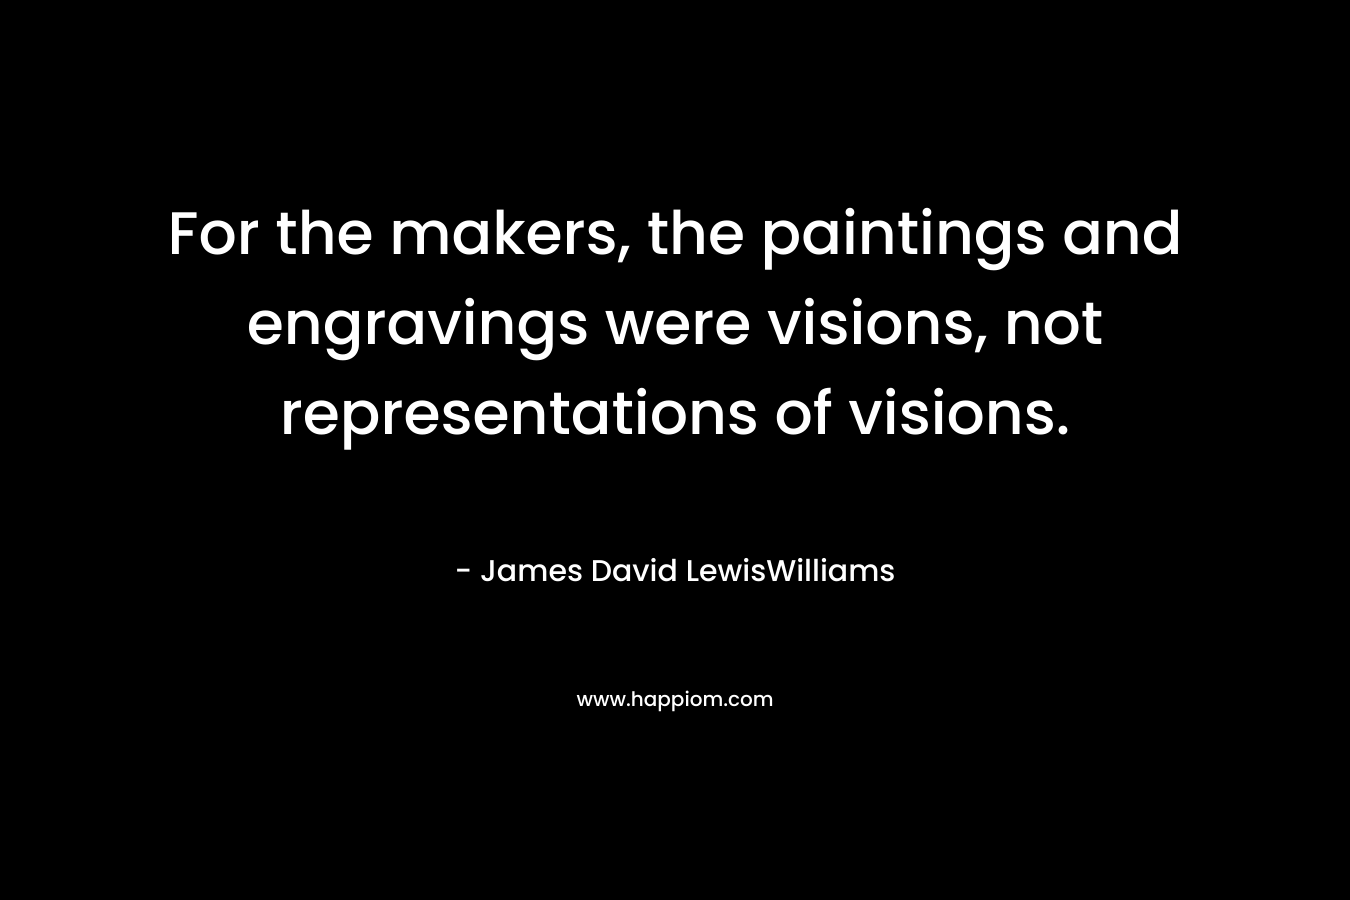 For the makers, the paintings and engravings were visions, not representations of visions.